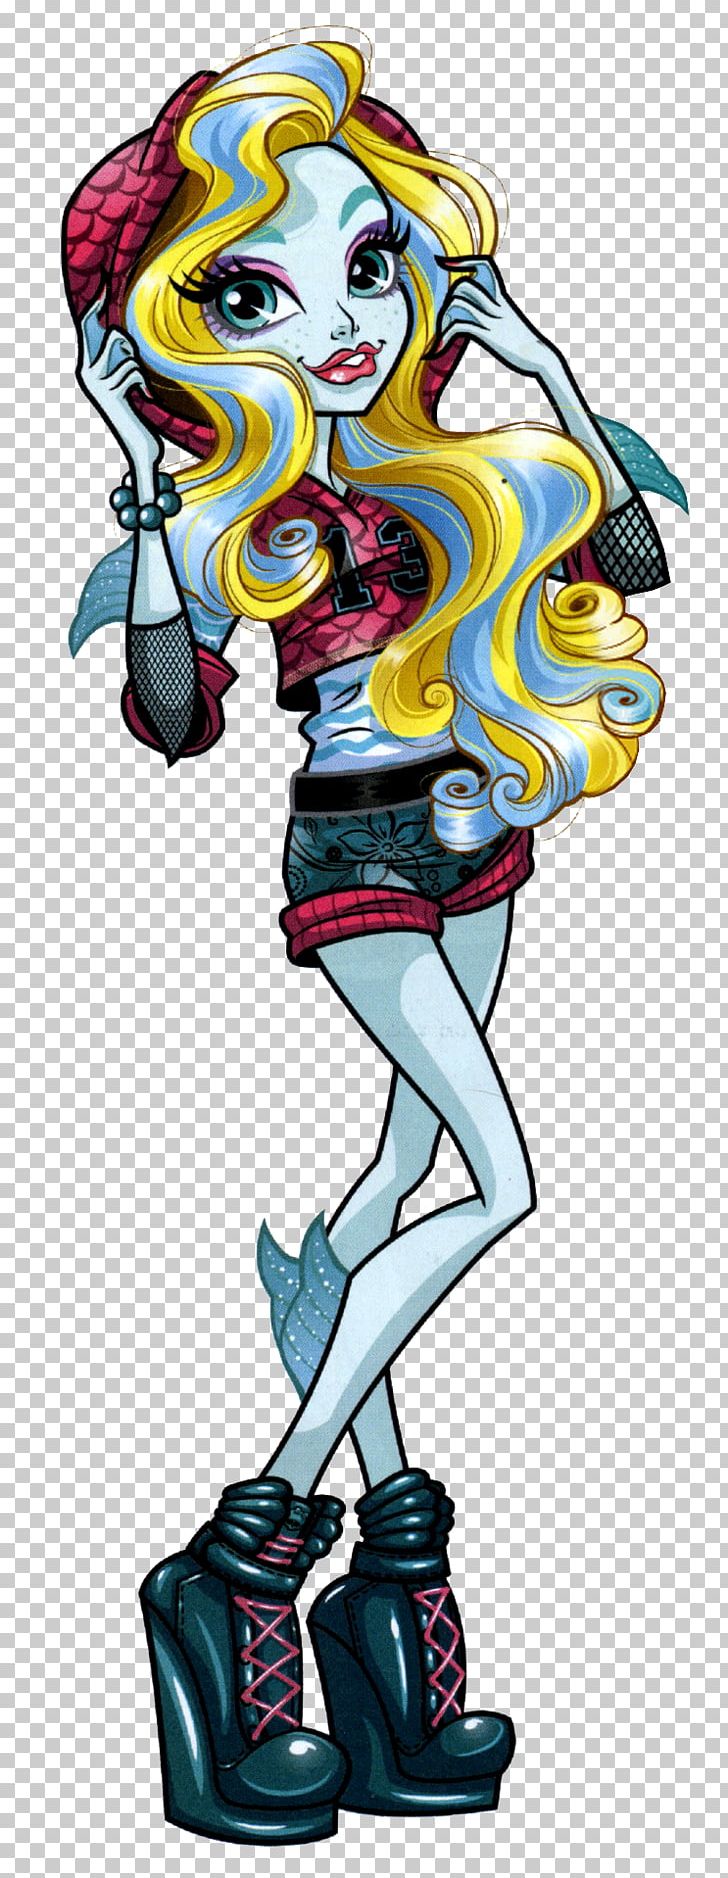 Lagoona Blue Monster High Clawdeen Wolf Frankie Stein Draculaura PNG, Clipart, Art, Cleo Denile, Doll, Draculaura, Fantasy Free PNG Download